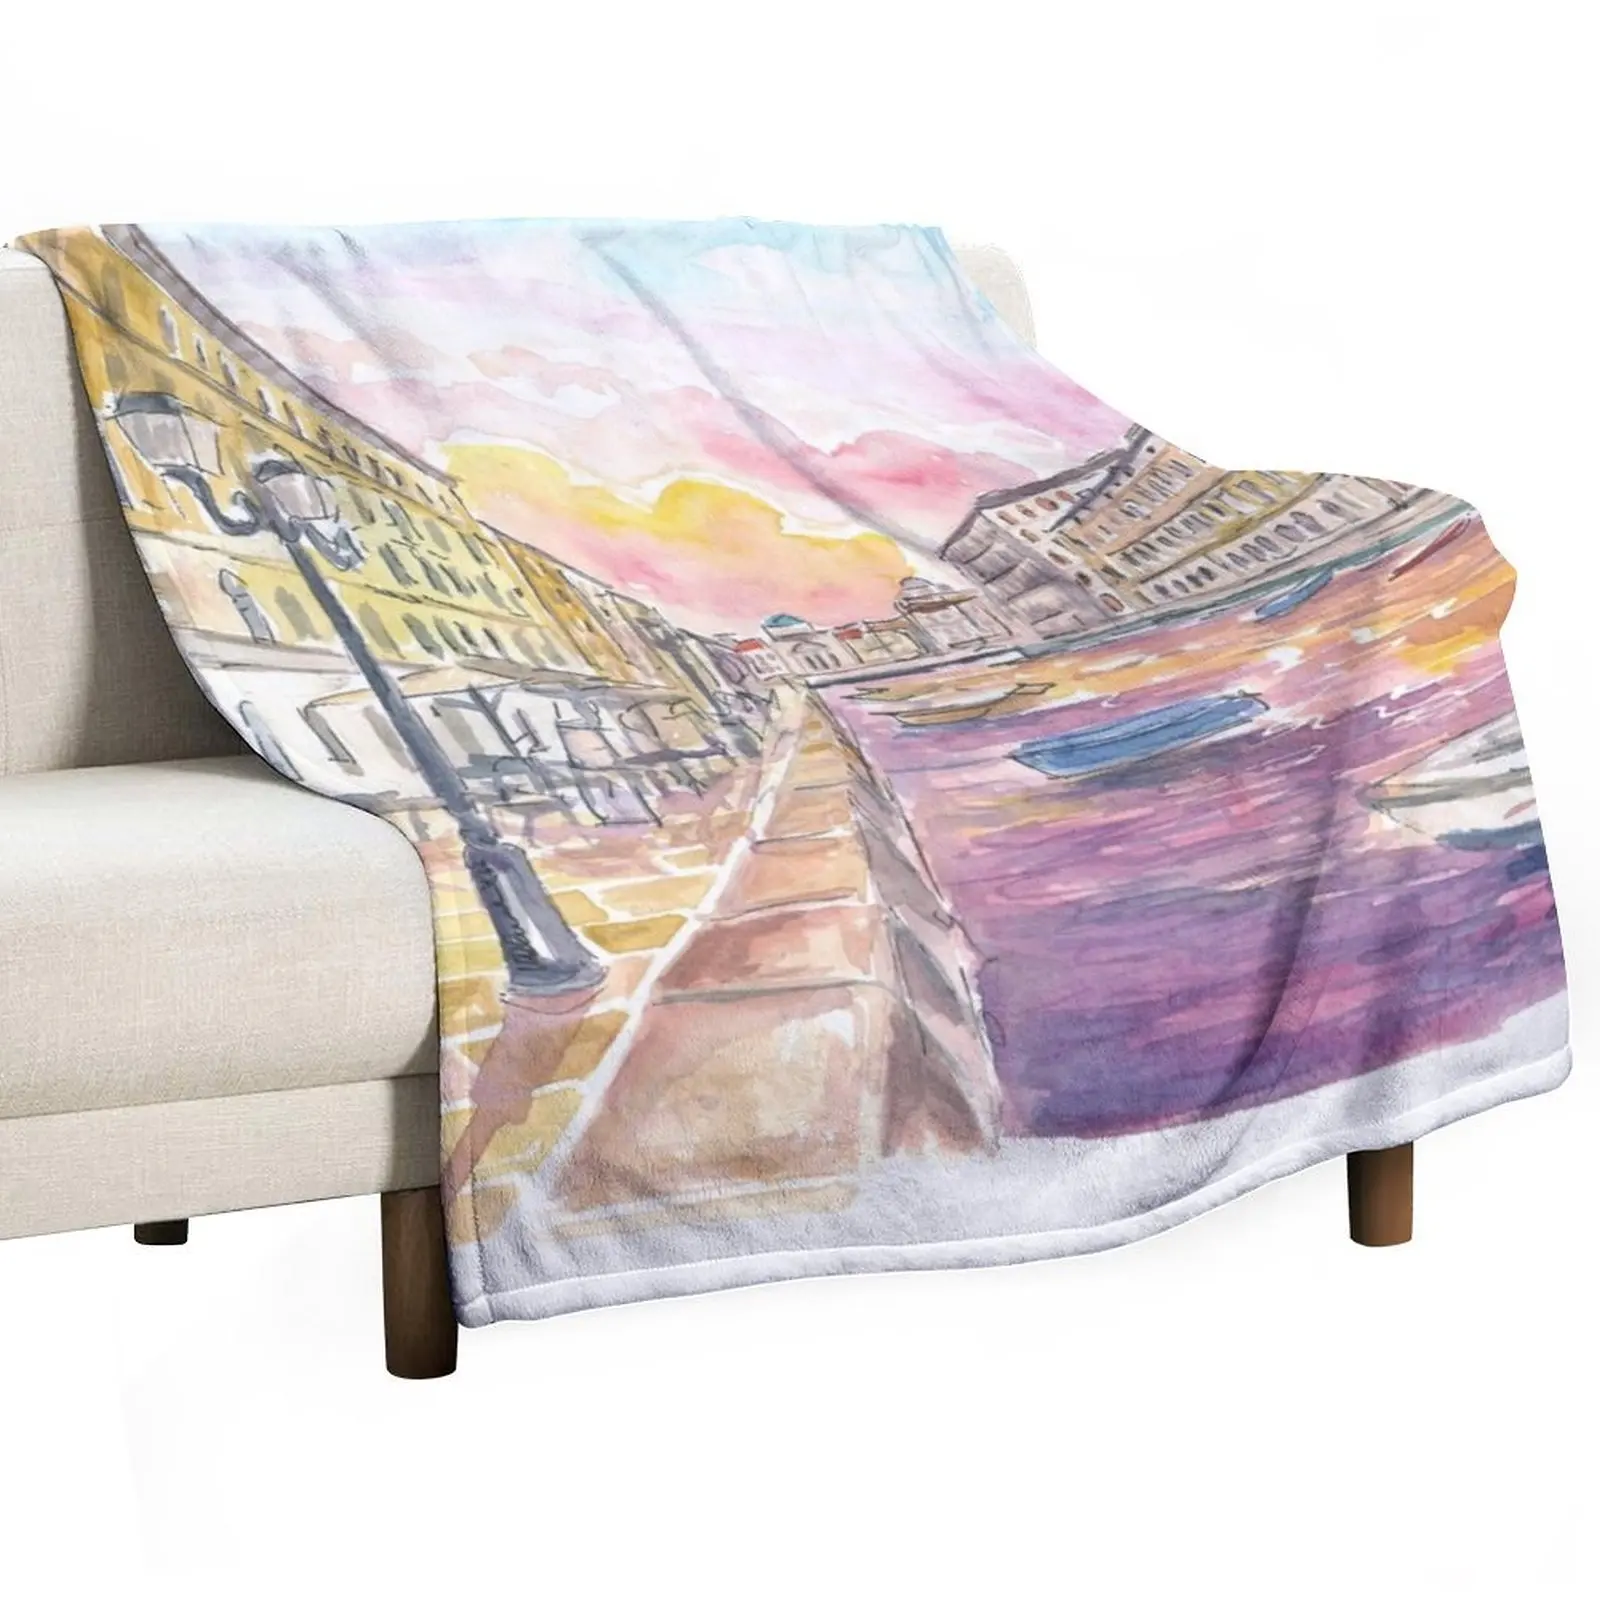 

Canal Grande in Trieste Italy at Sunset Throw Blanket Luxury Designer Cute Plaid Giant Sofa Kid'S Blankets